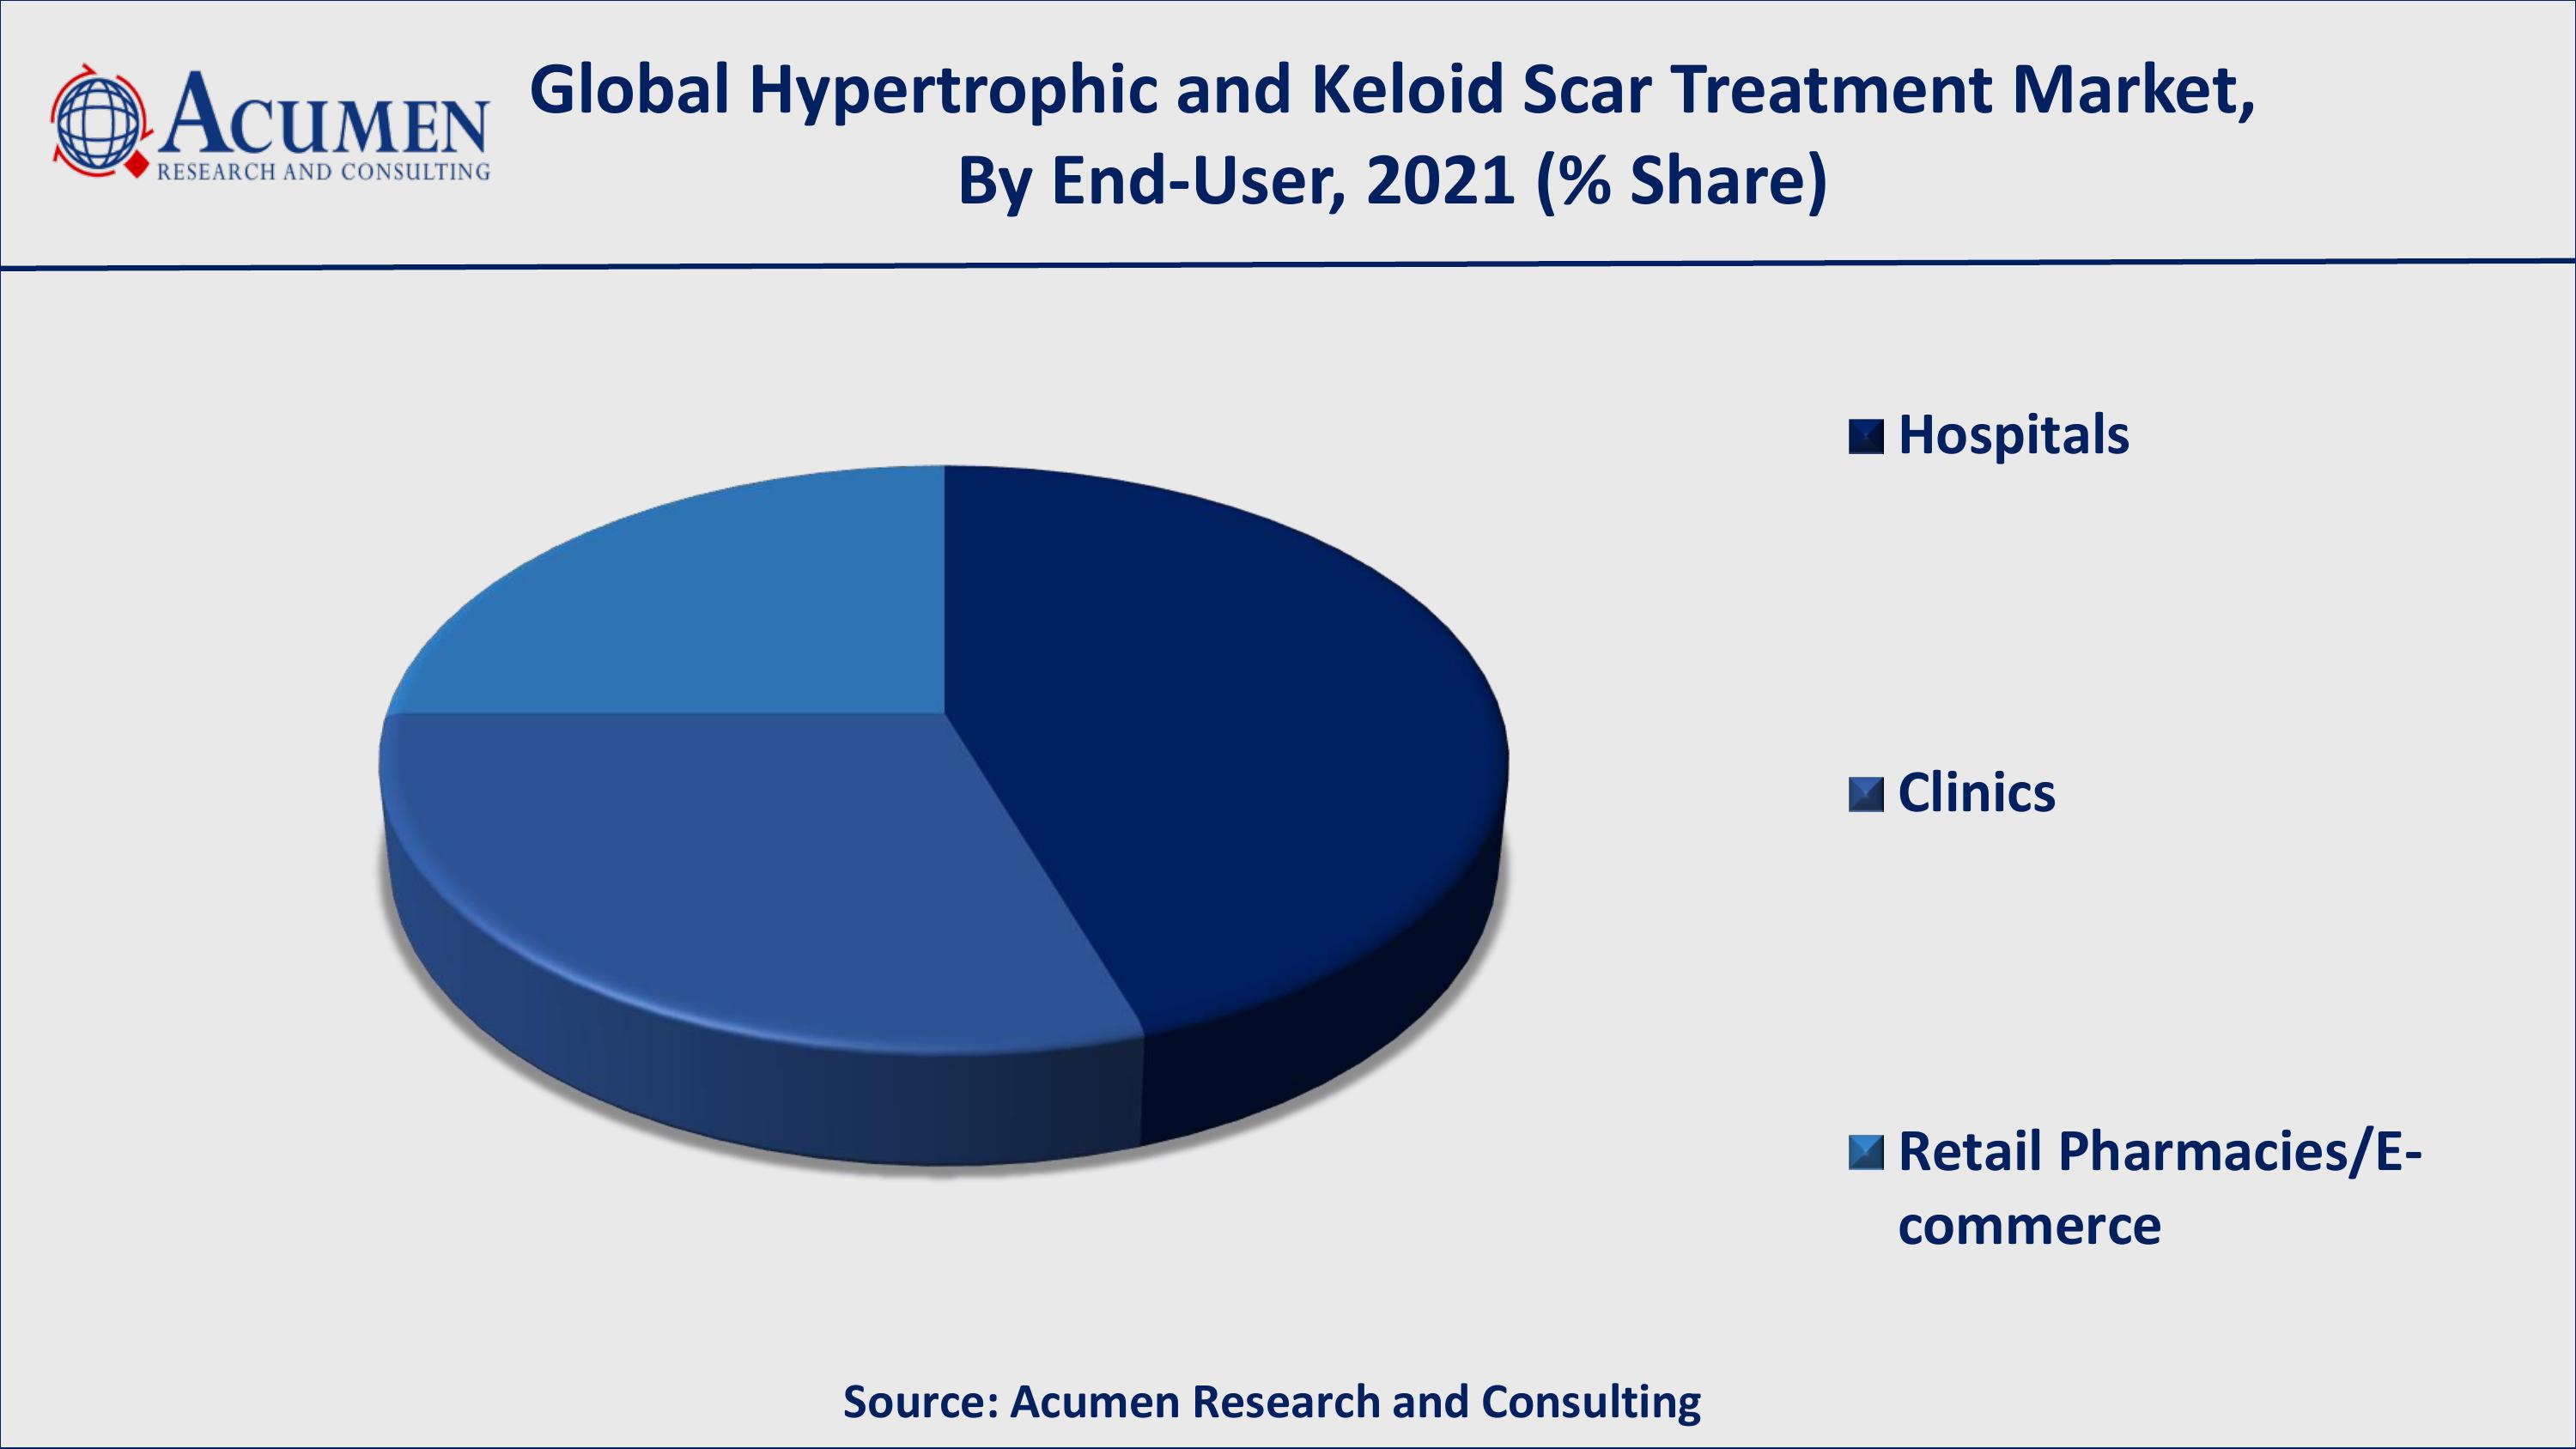 Among end-user, hospitals occupied more than 44% of the market share from 2022 to 2030